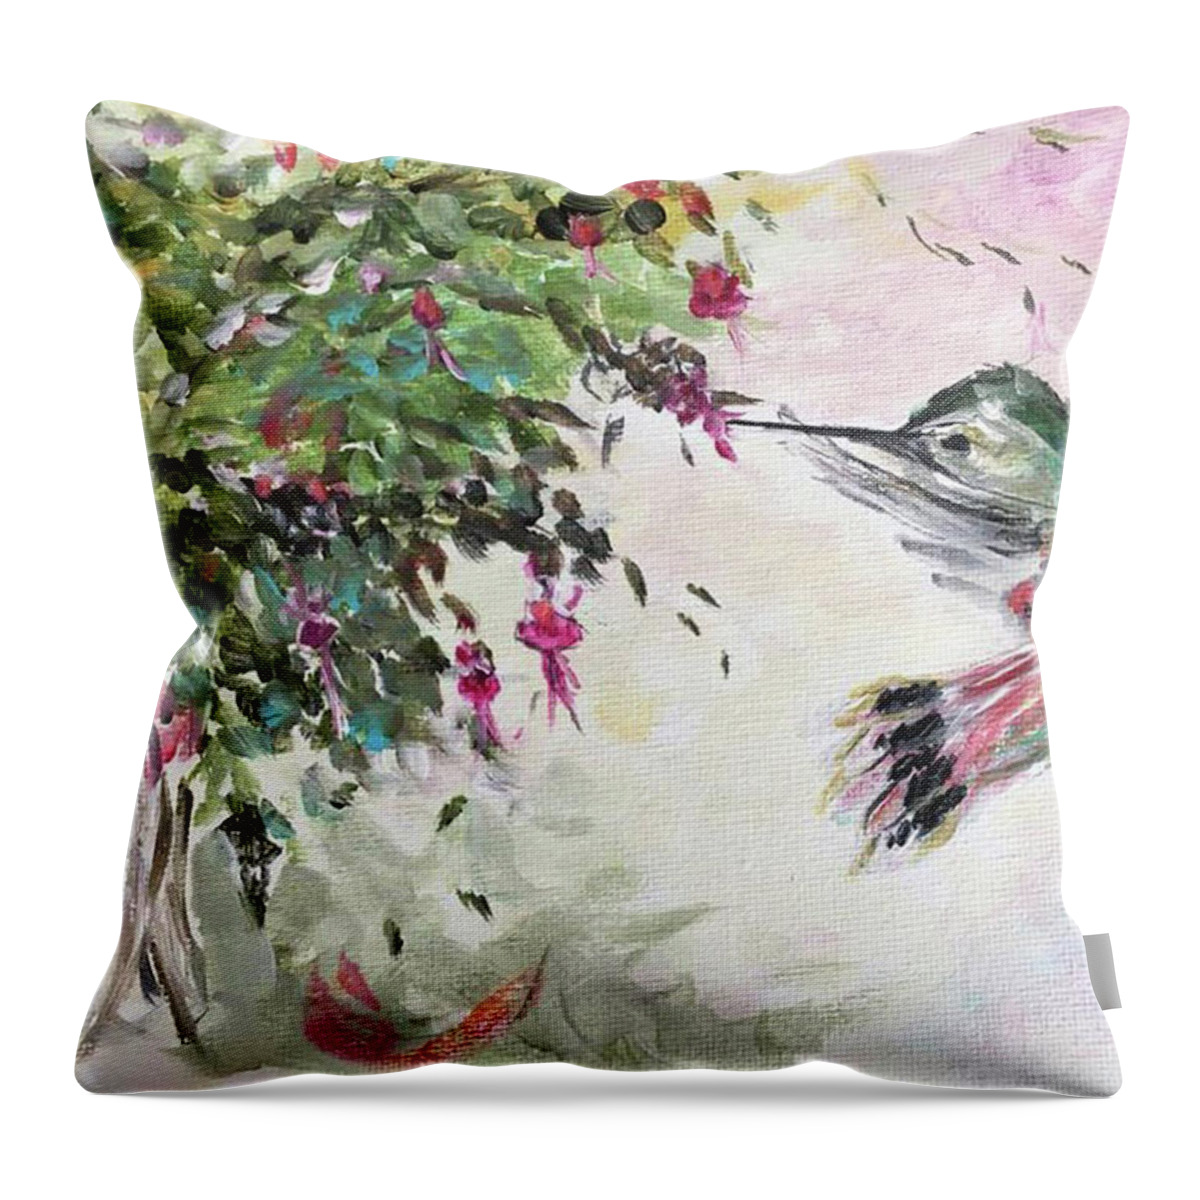 Hummingbird Throw Pillow featuring the painting Hummingbird with Fuchsias by Roxy Rich